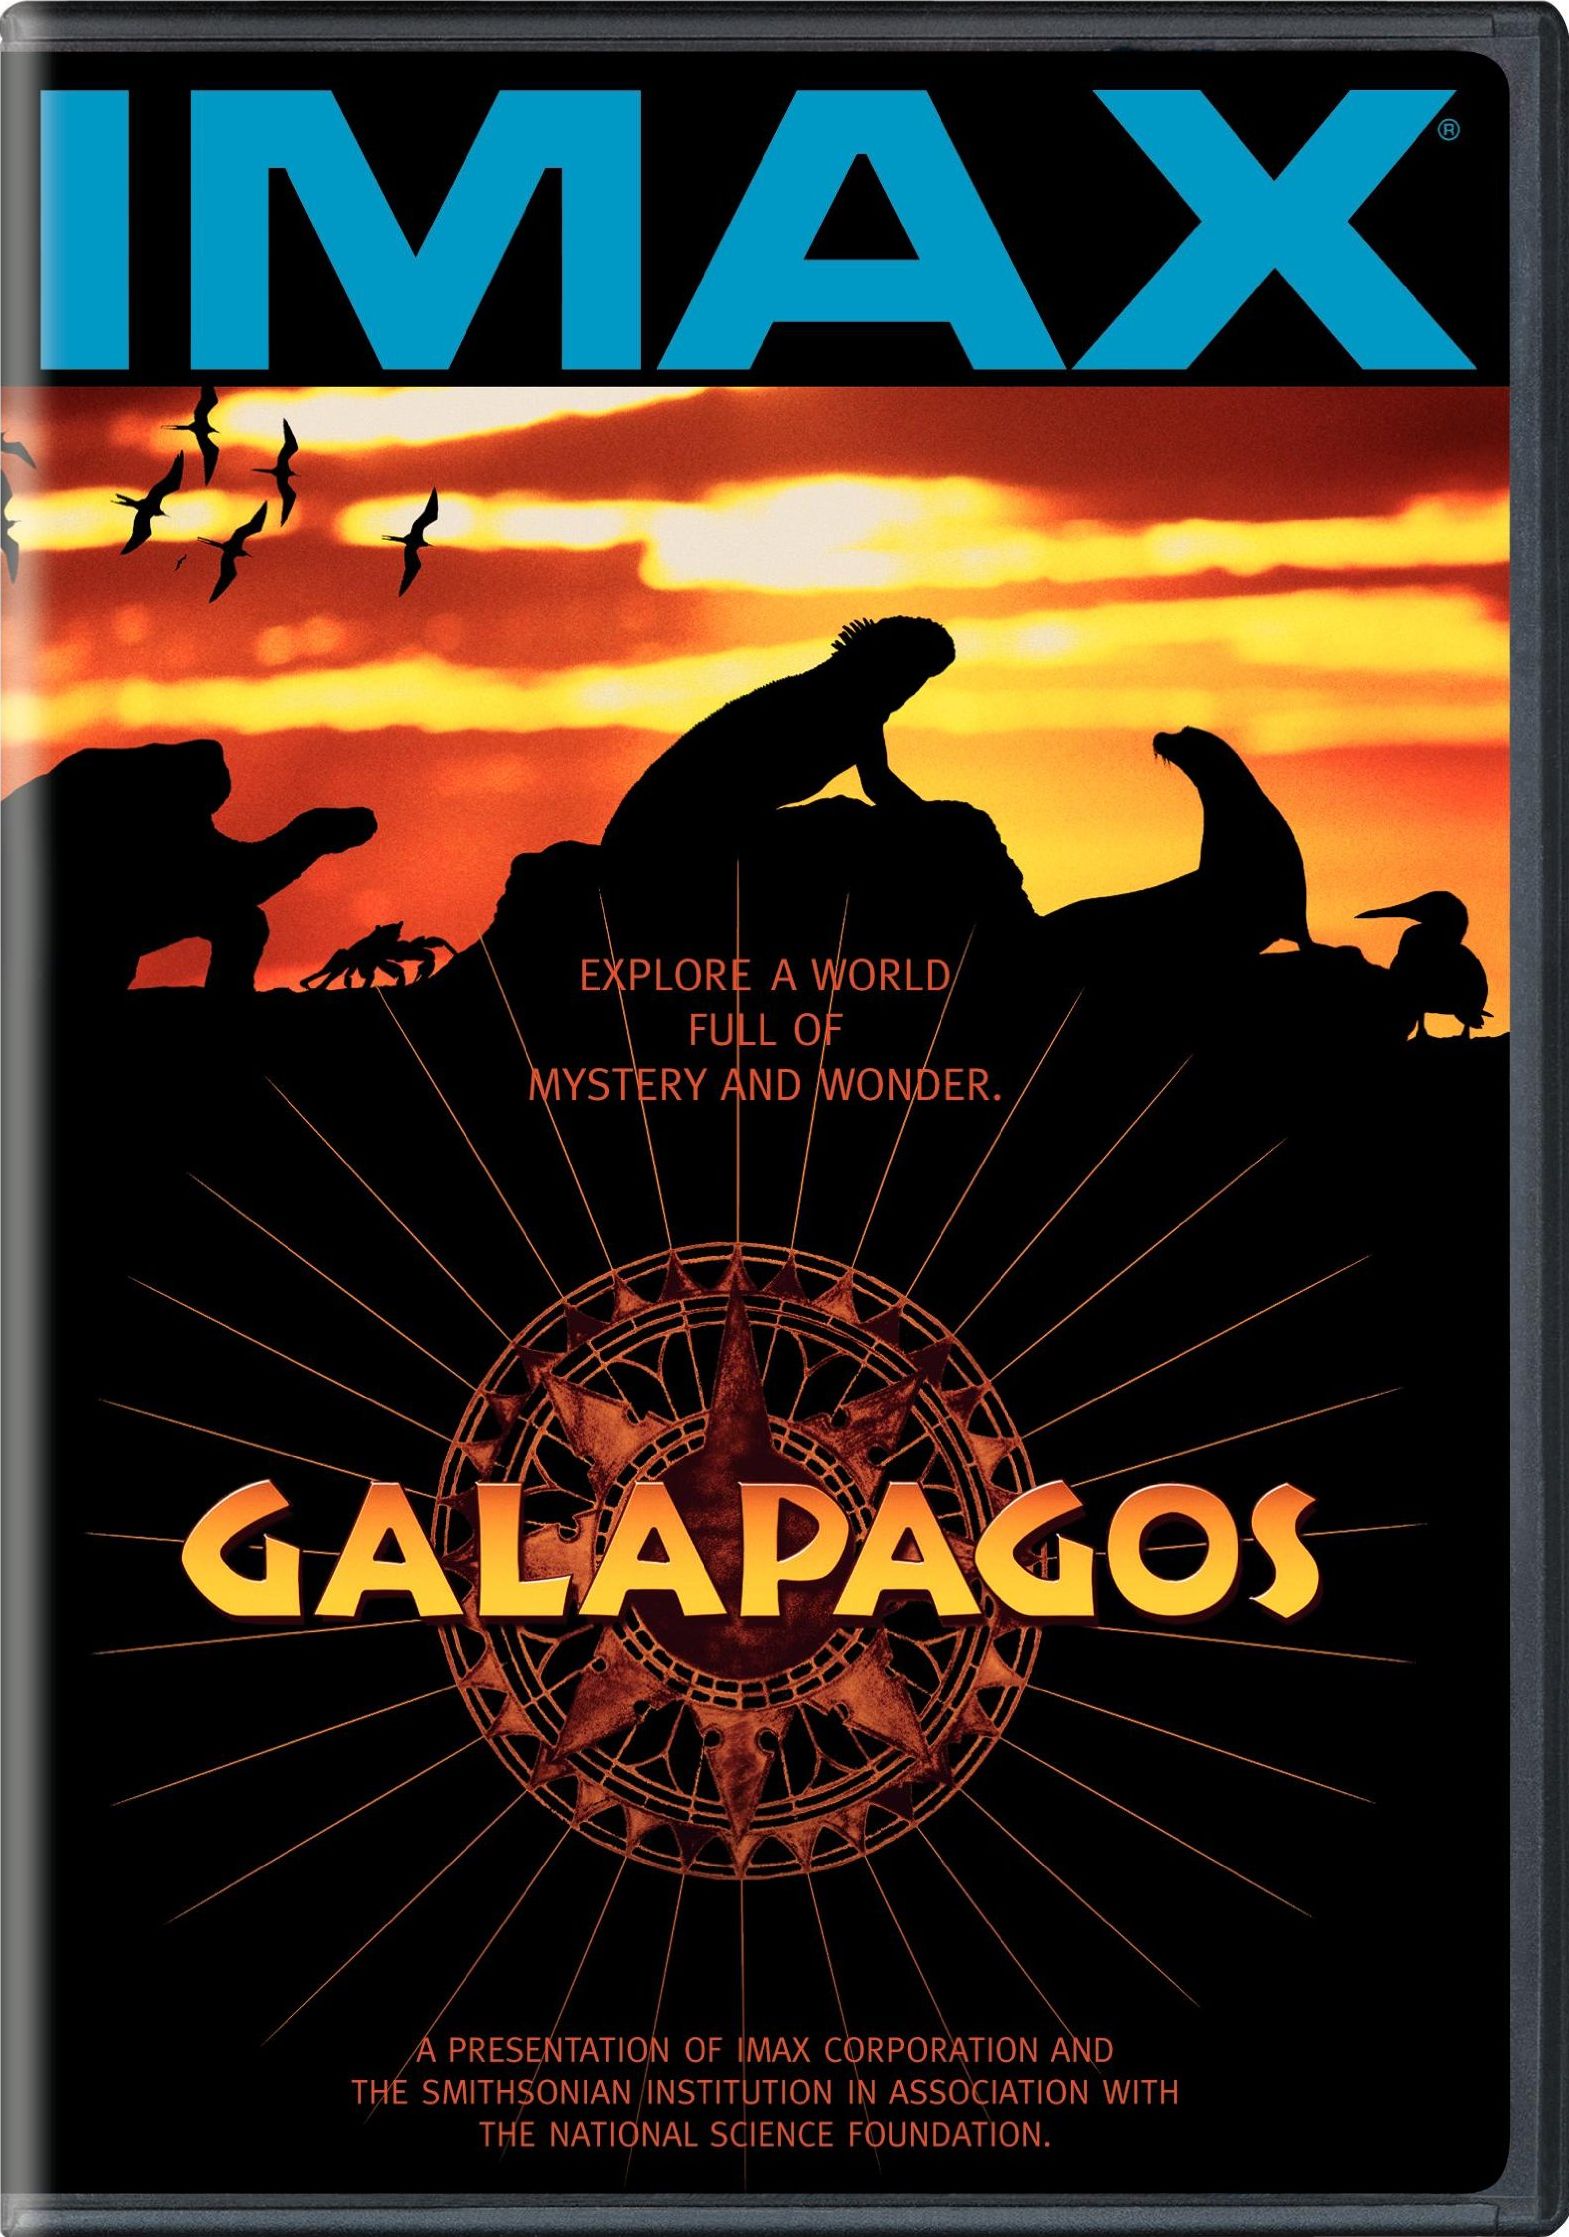 Galapagos: The Enchanted Voyage DVD Release Date1569 x 2237